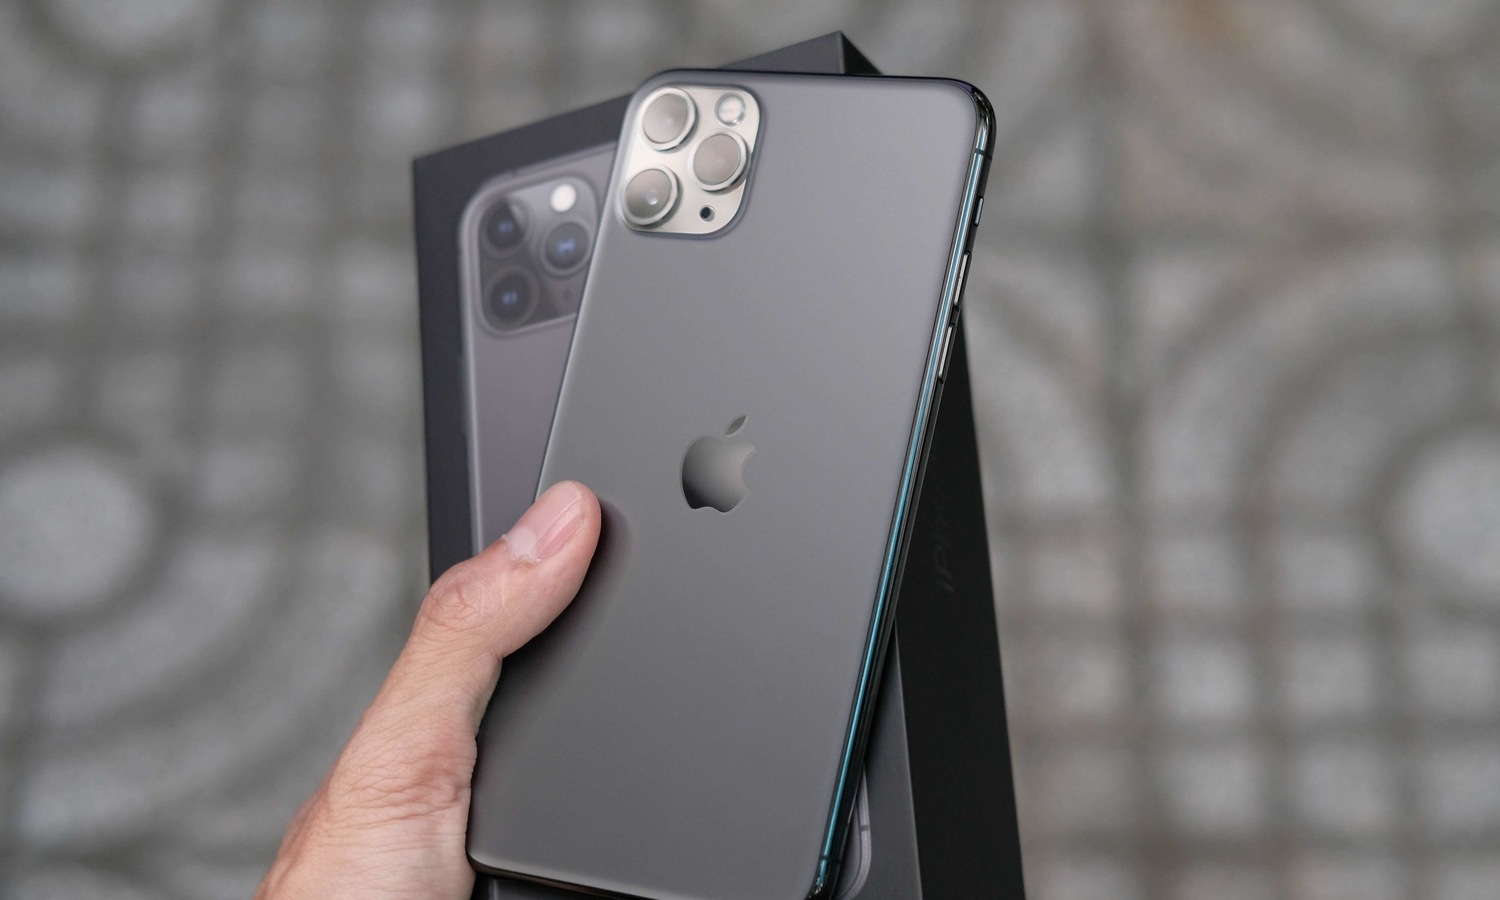 Apple iPhone 12 Pro Max launch: Rumoured price, specs, features and